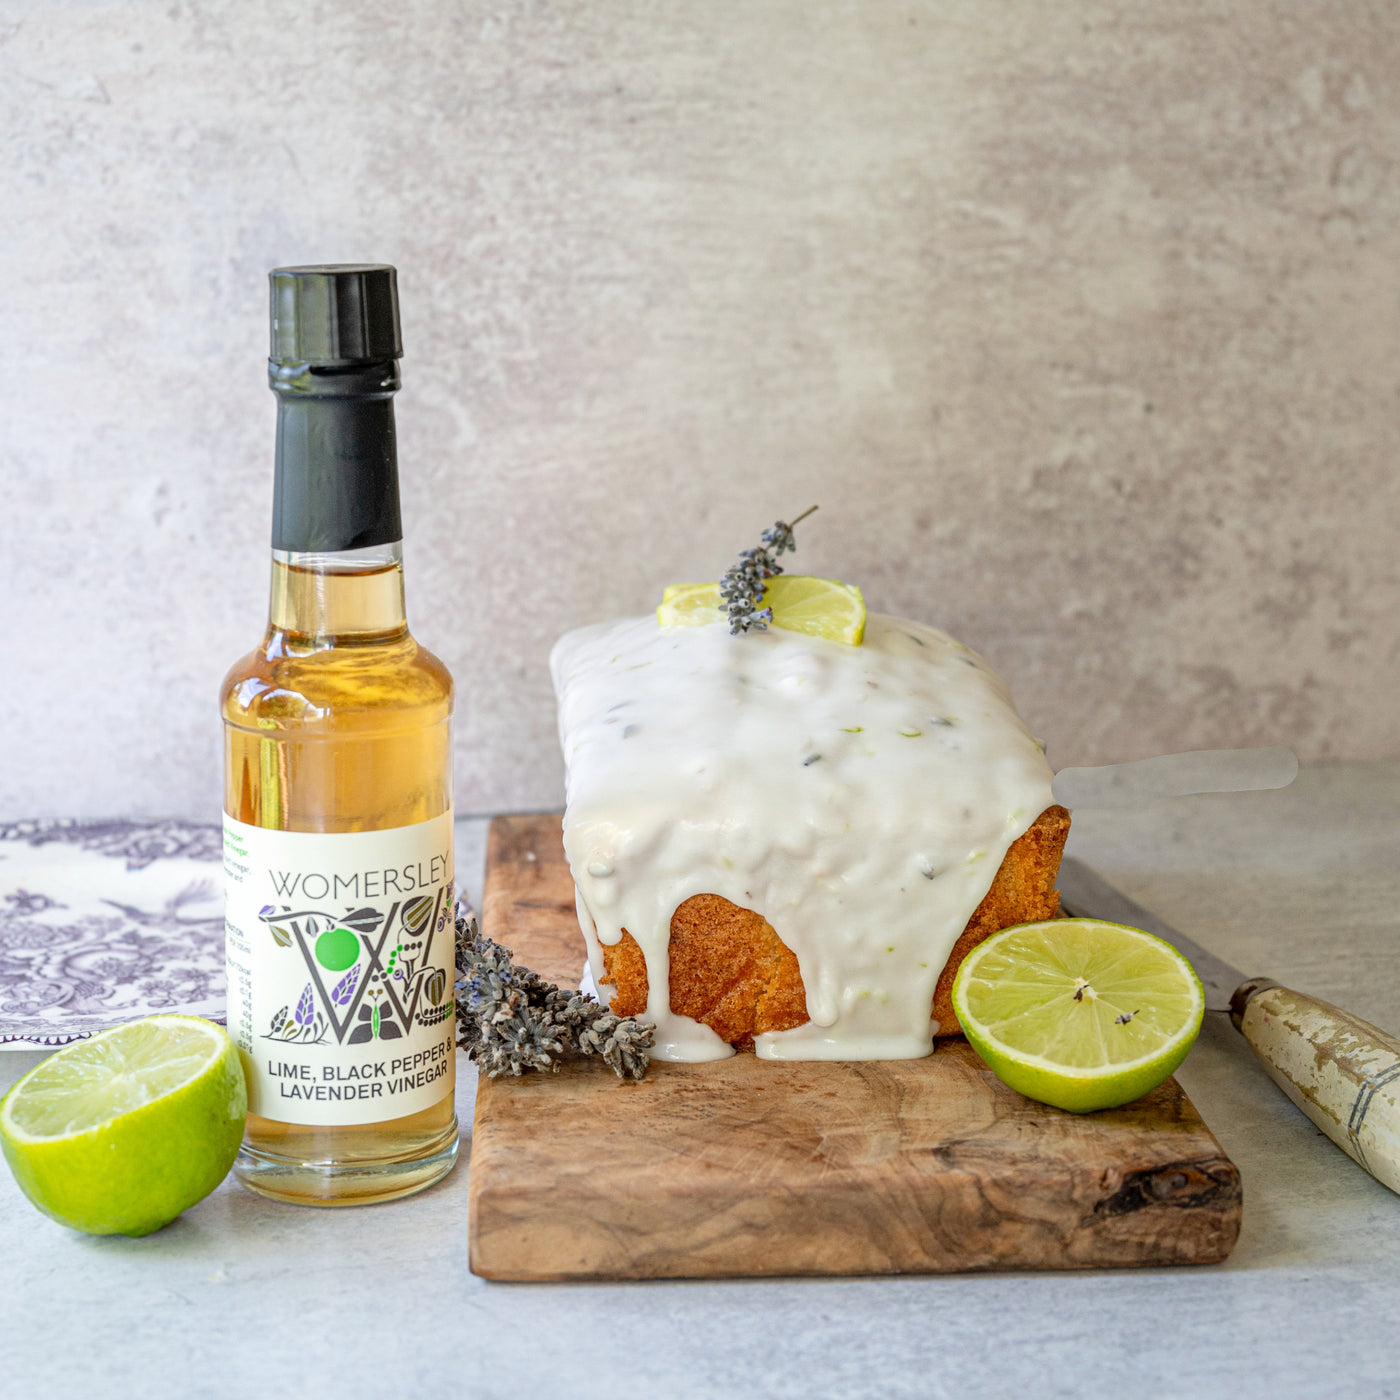 Front view of Lime, Black Pepper and Lavender Drizzle cake on a cutting board made with Womersley Foods Lime, Black Pepper & Lavender Fruit Vinegar. Surrounded by ingredients, a bottle of Womersley Foods 150ml Lime, Black Pepper & Lavender Fruit Vinegar and a bread knife and plate.